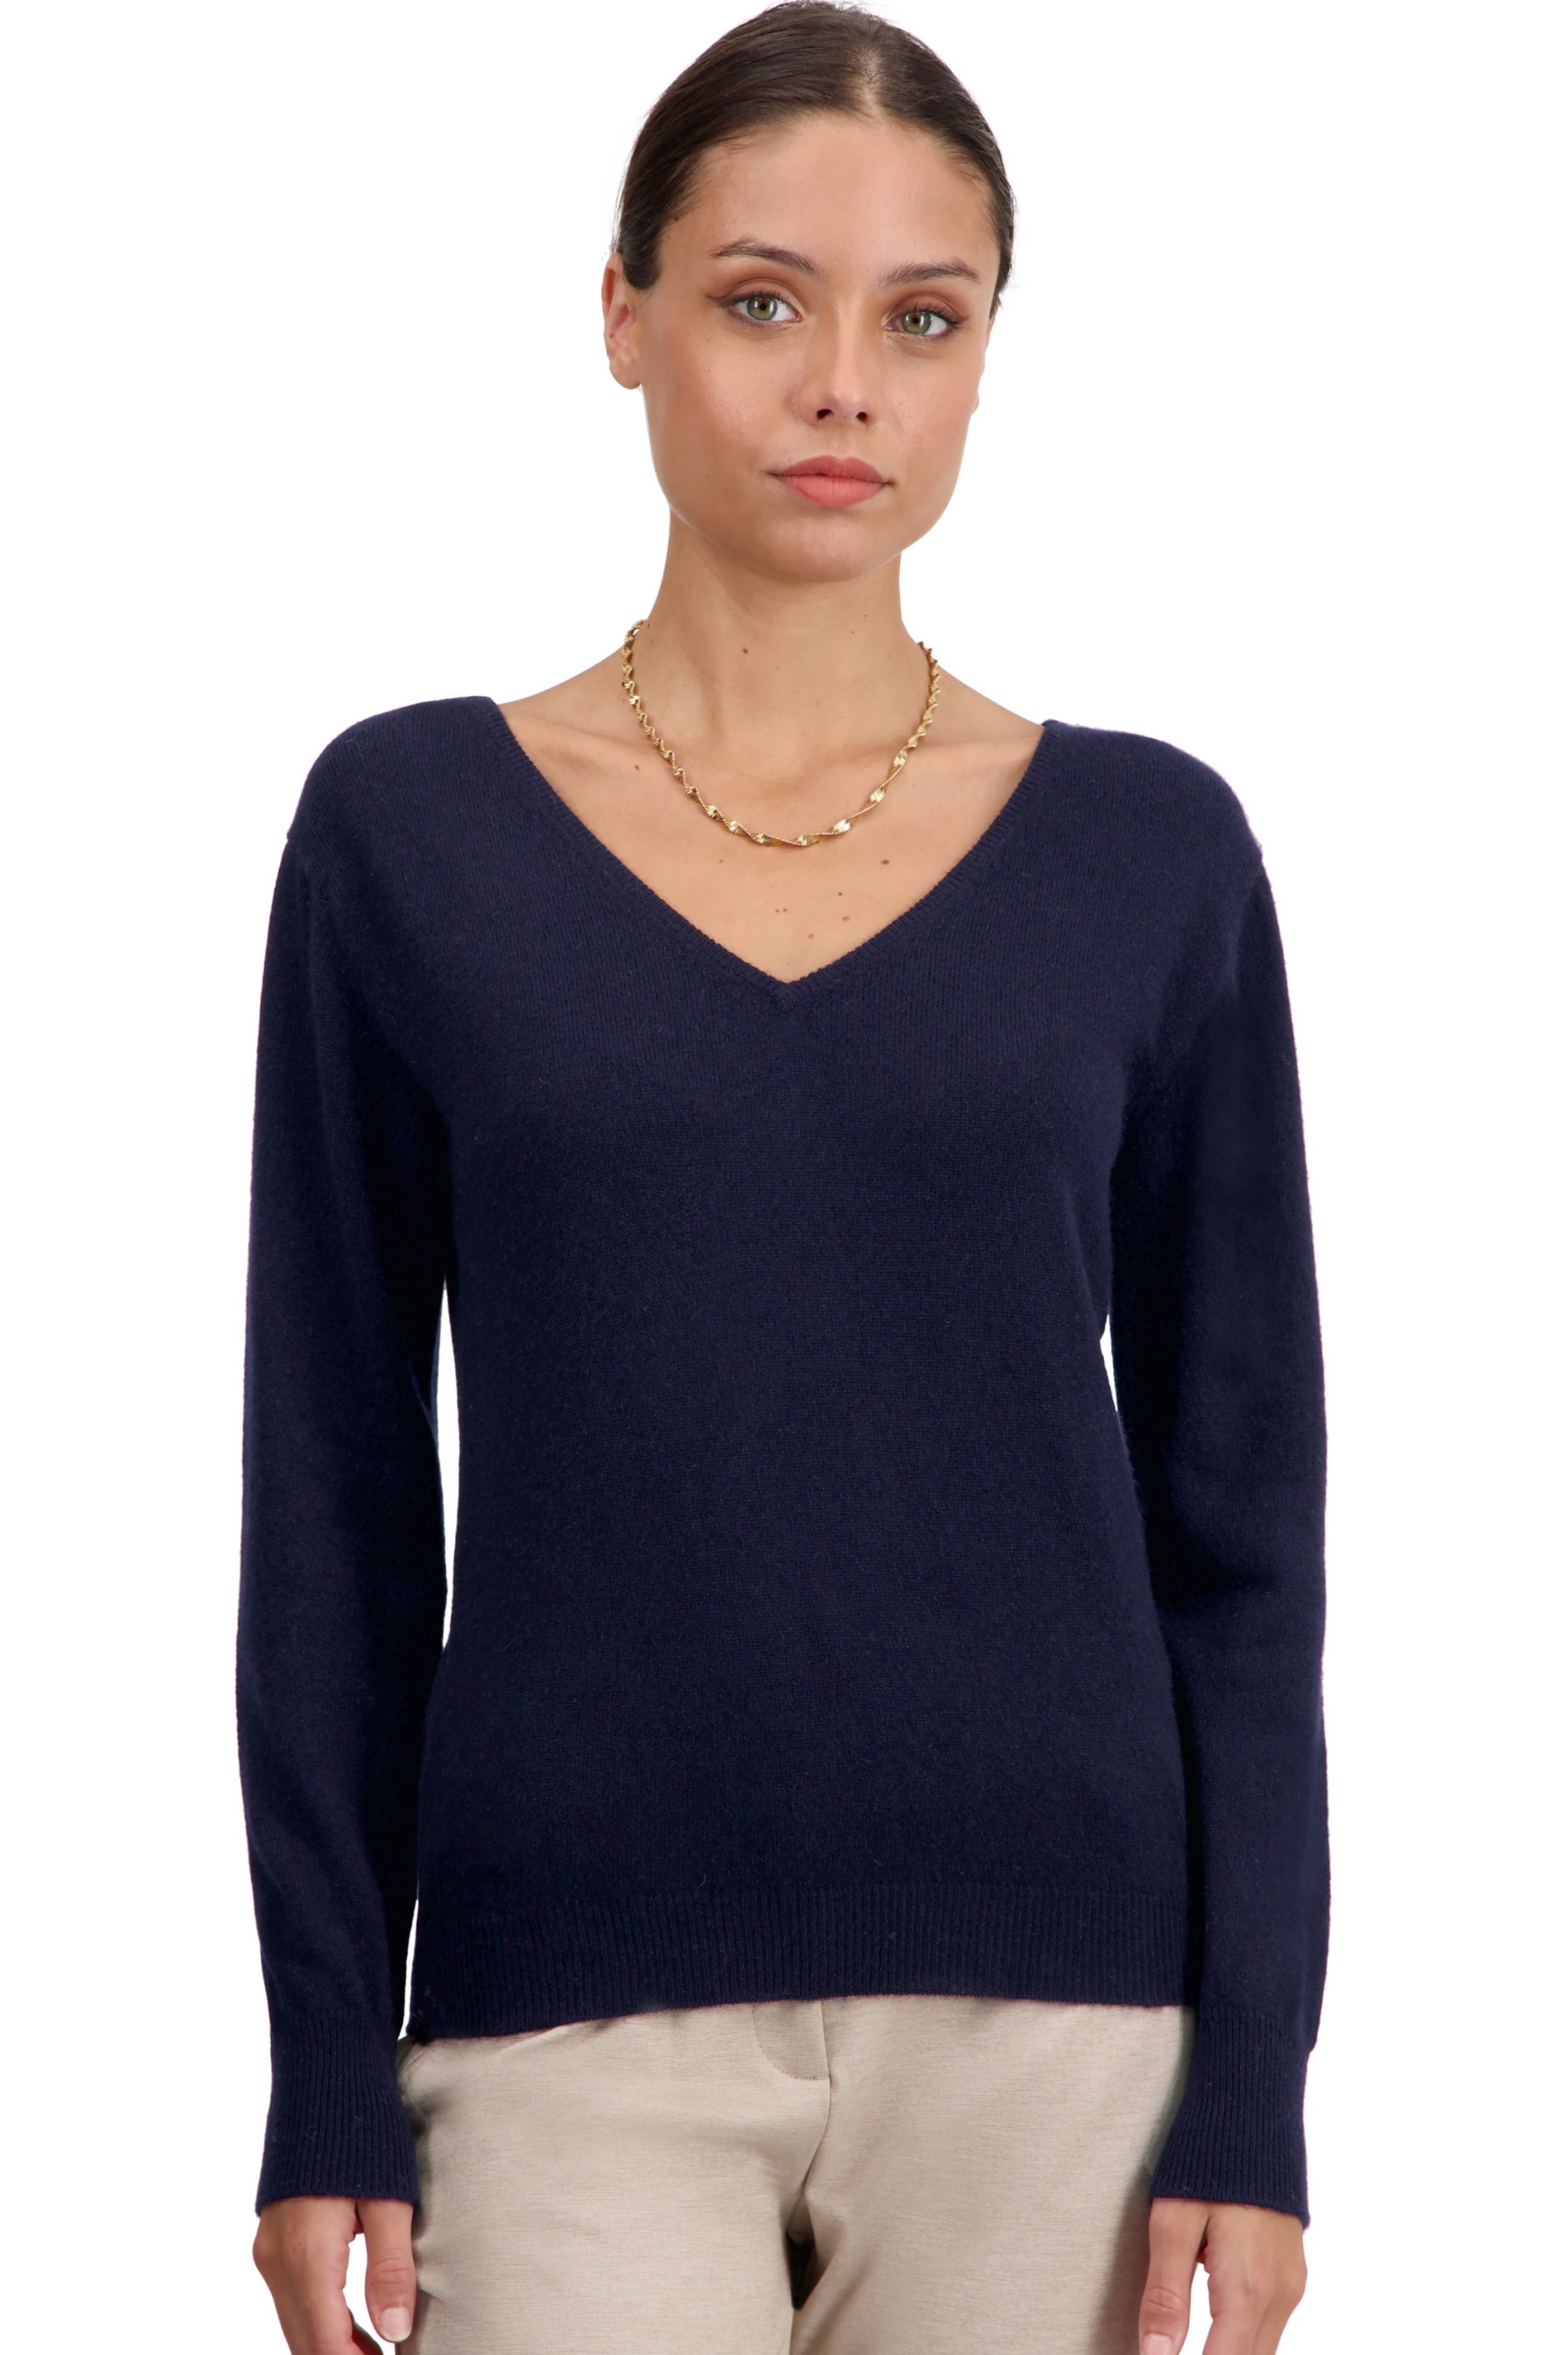 Cashmere ladies basic sweaters at low prices trieste first dress blue xs